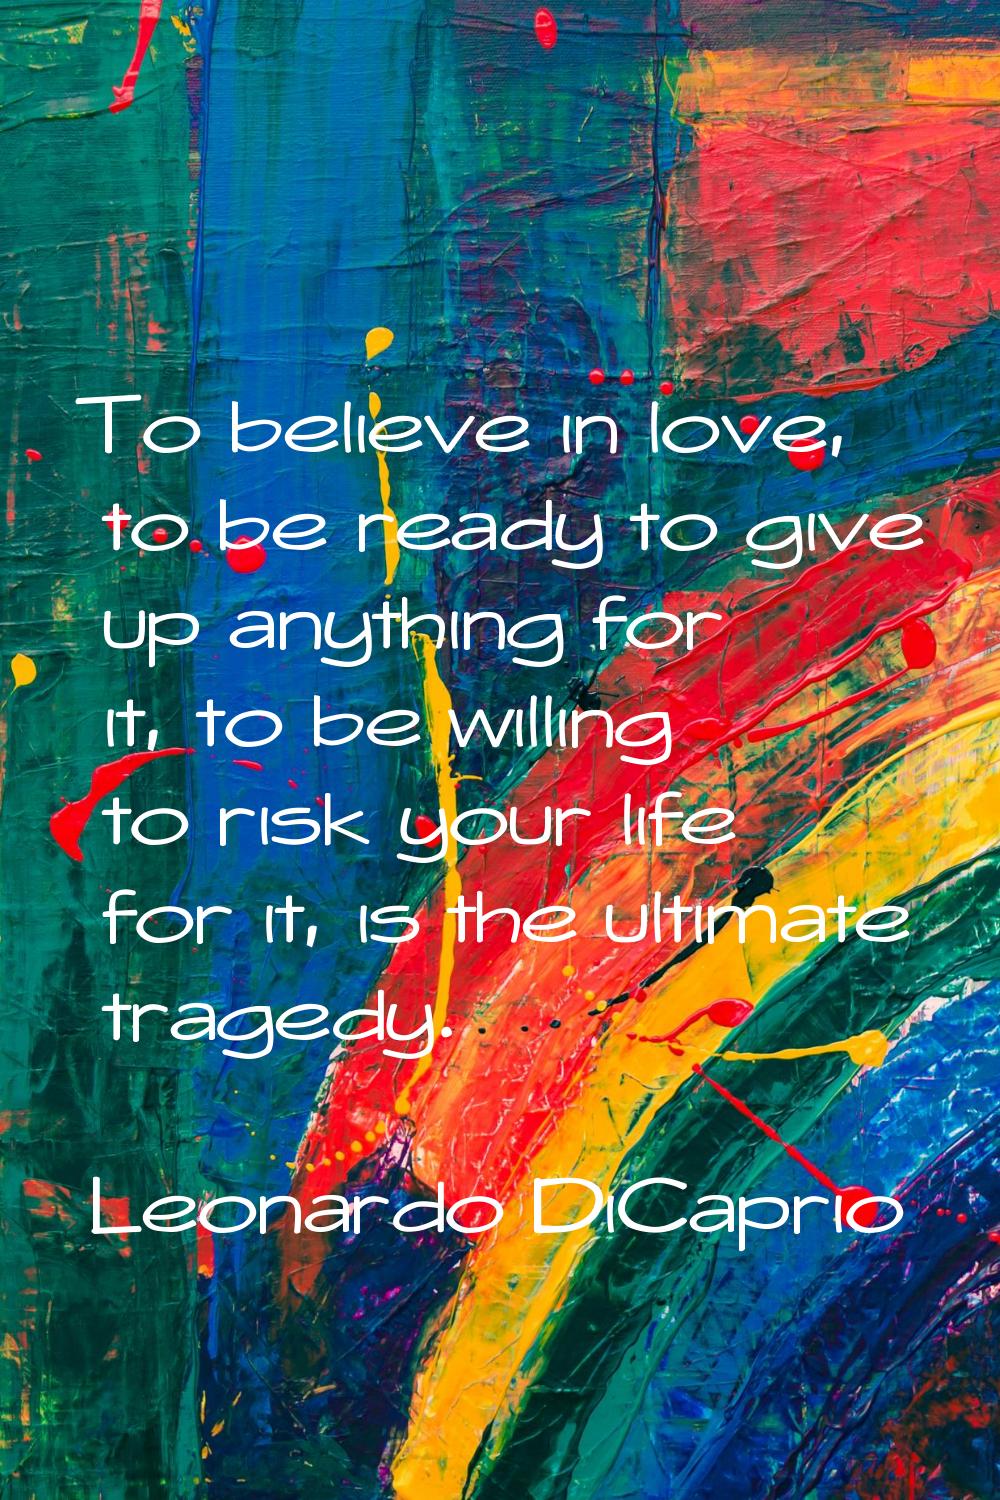 To believe in love, to be ready to give up anything for it, to be willing to risk your life for it,